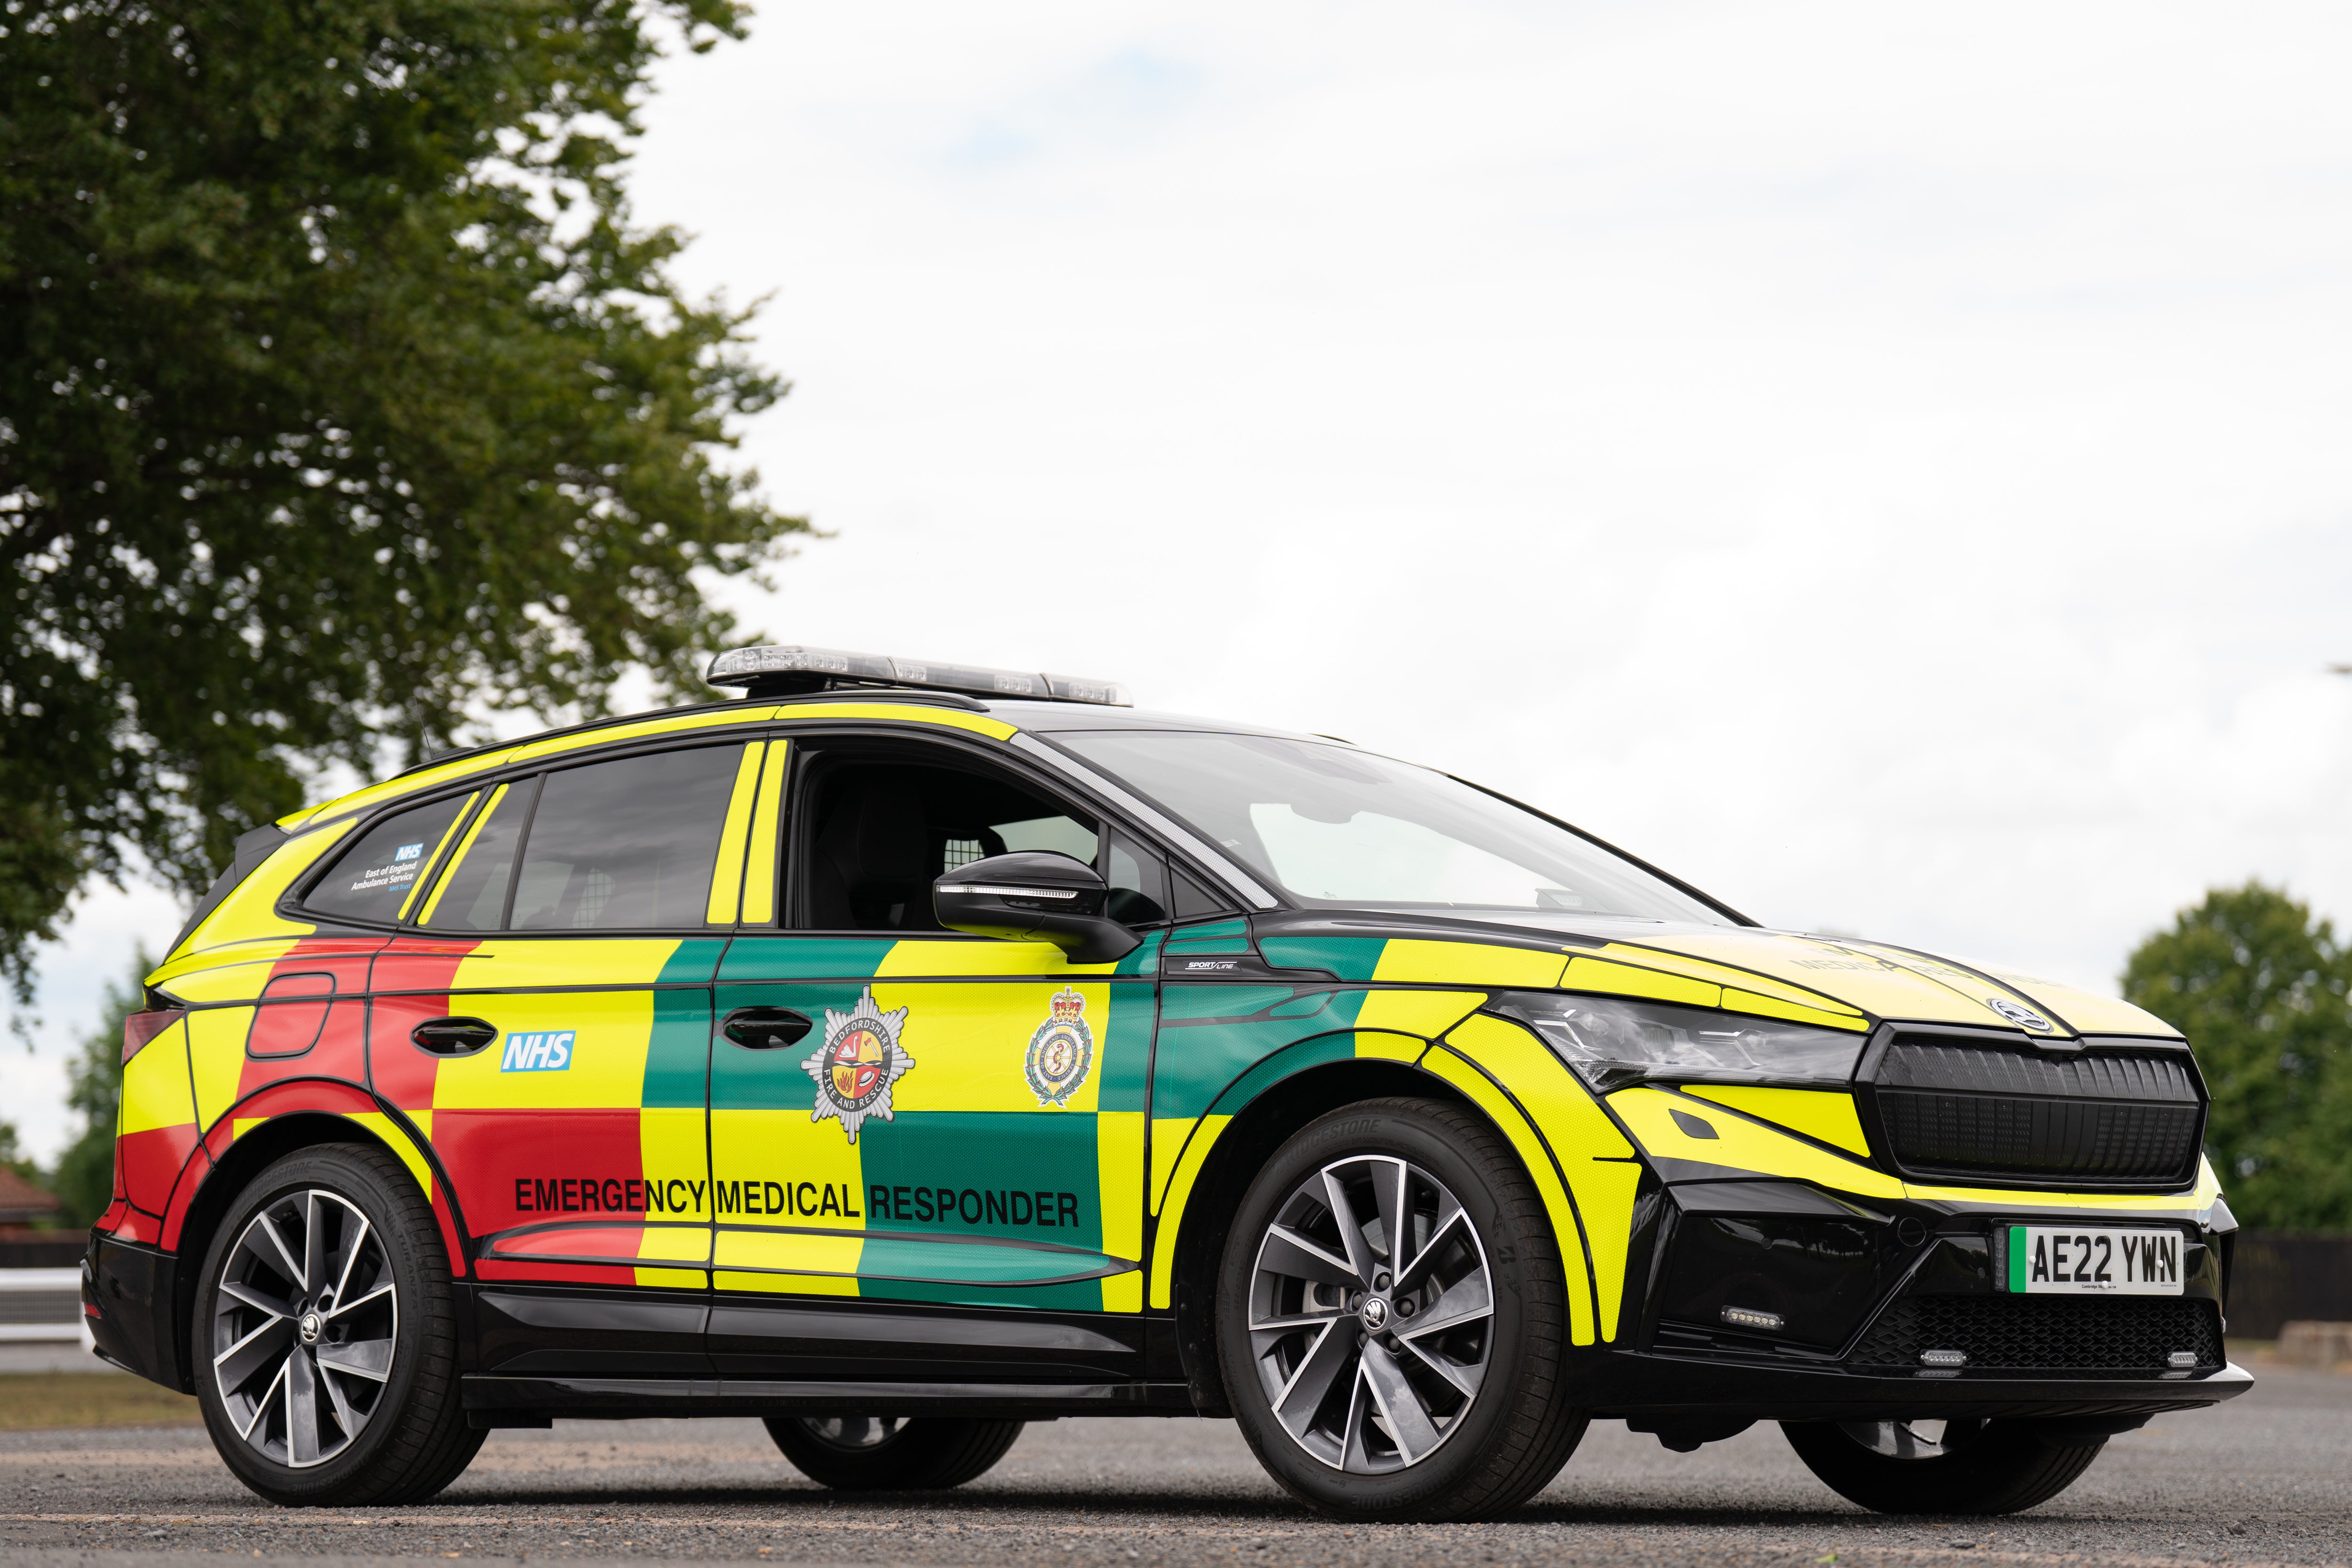 The three new electric vehicles are part of a two-year trial with the East of England Ambulance Service NHS Trust (Joe Giddens/ PA)